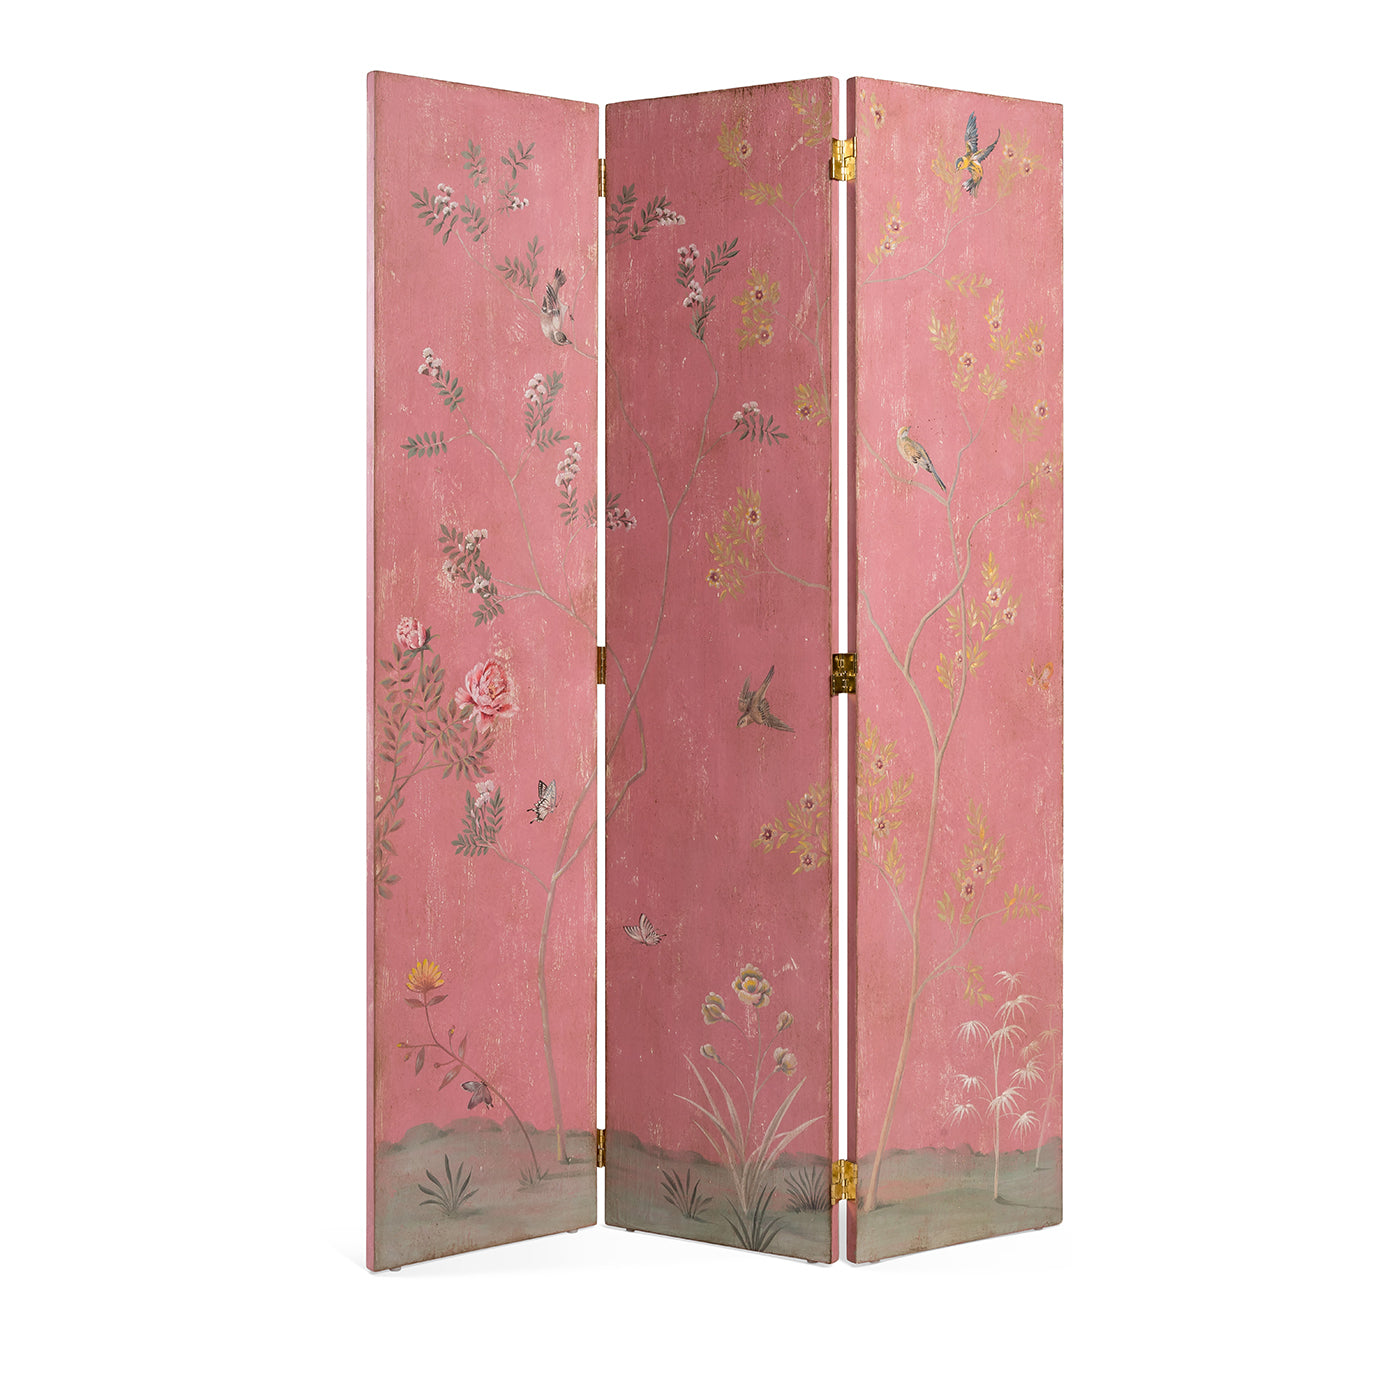 Otello Folding Screen with Floral Motifs - Alternative view 3